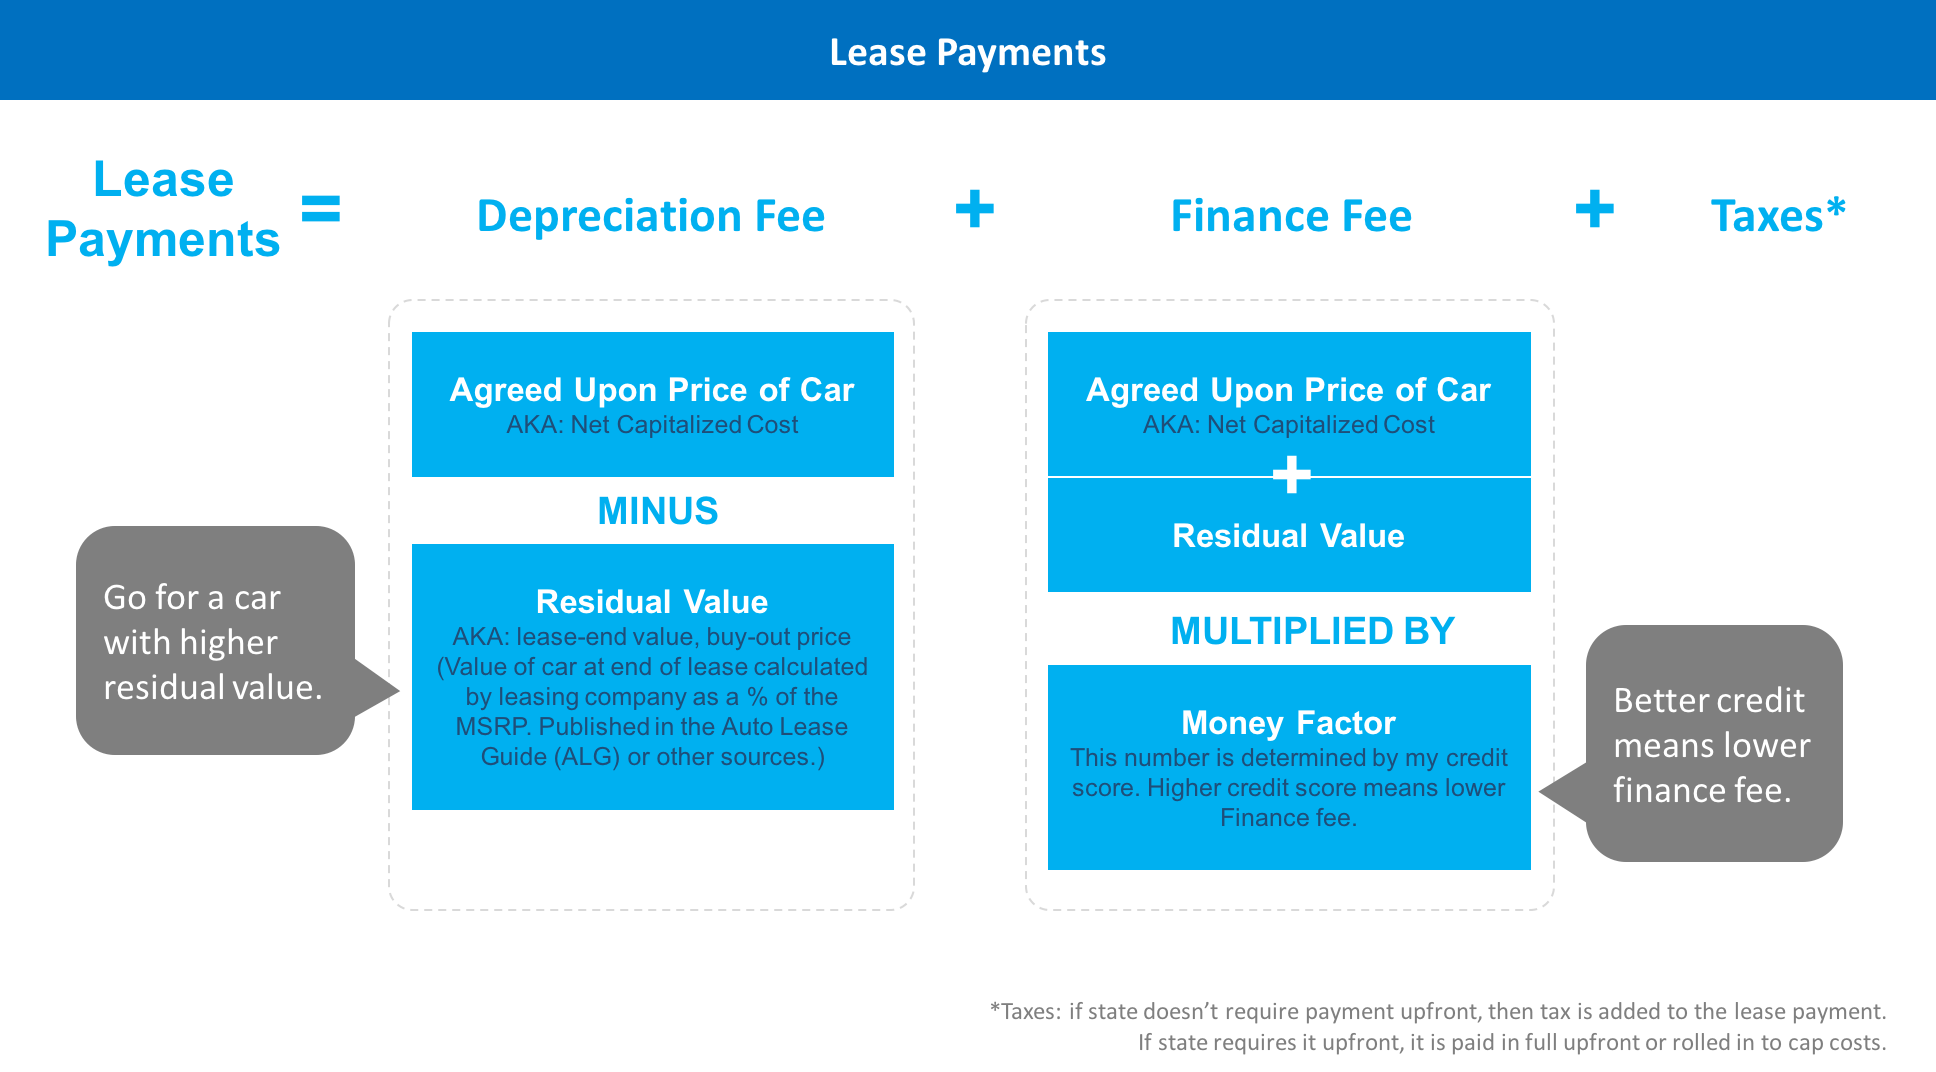 Car Leasing Tips - Lease Payments